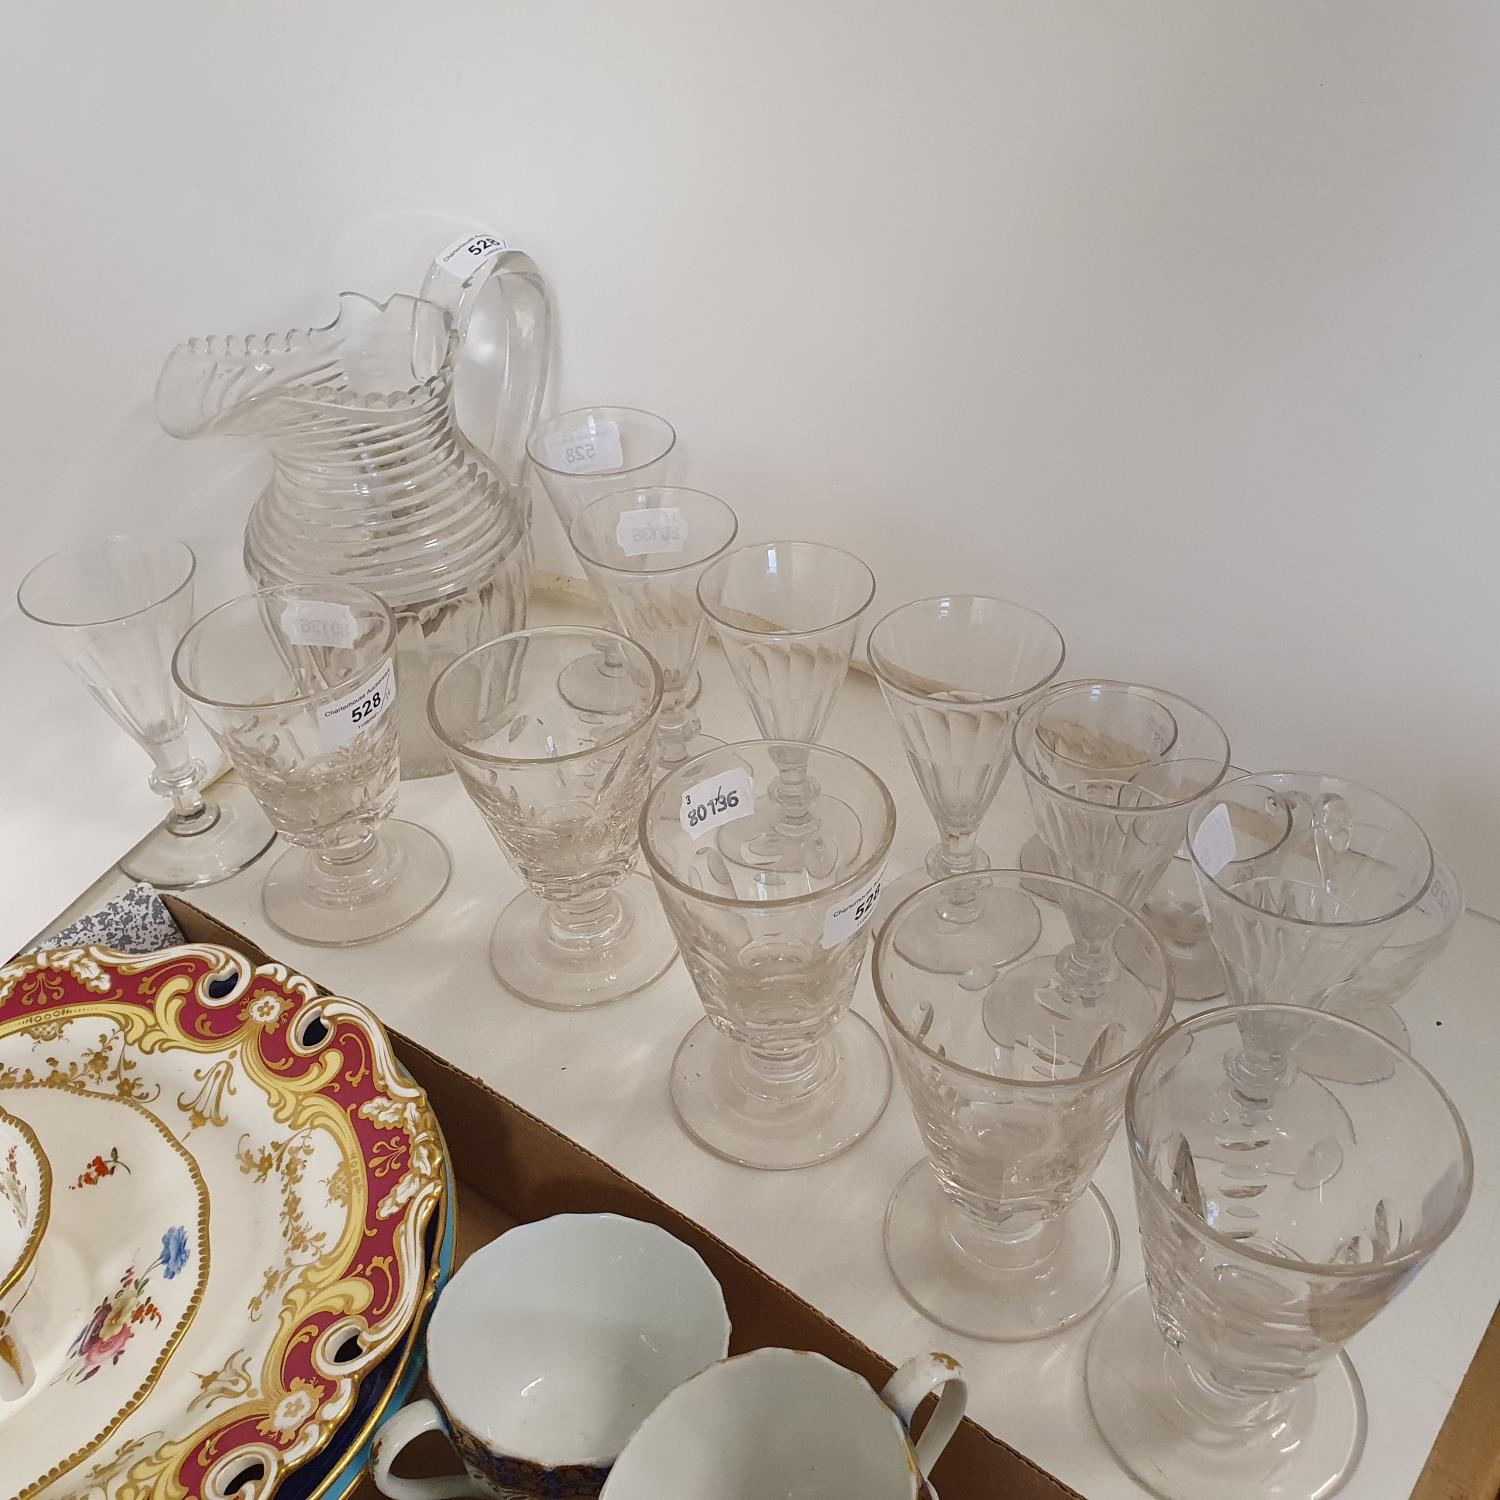 A set of seven 19th century flutes, and other glassware (16) - Image 2 of 2